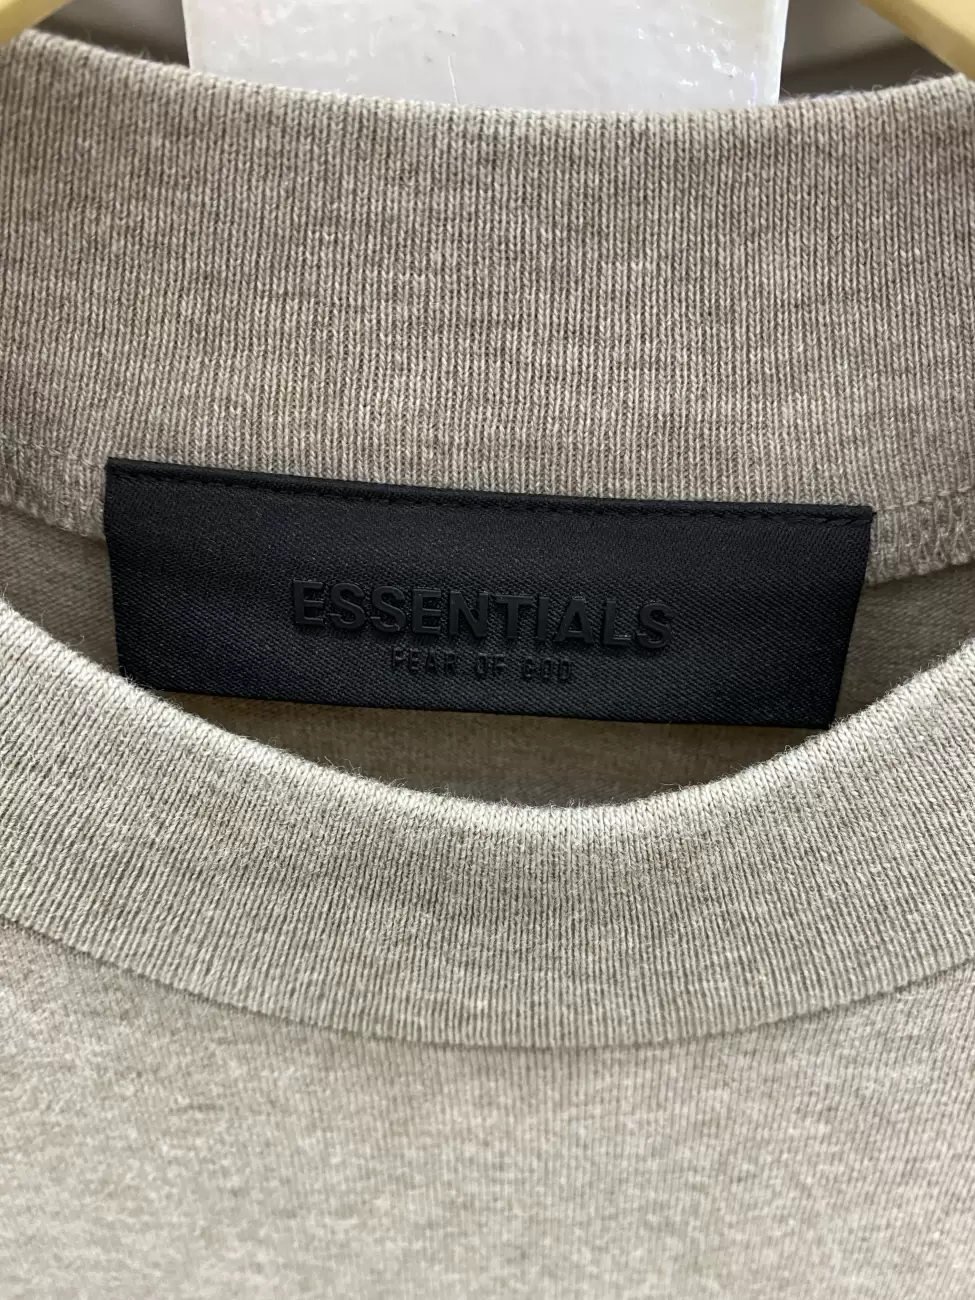 38630 - Fear Of God Essentials Ss24 Core Heather Tee | Item Details ...